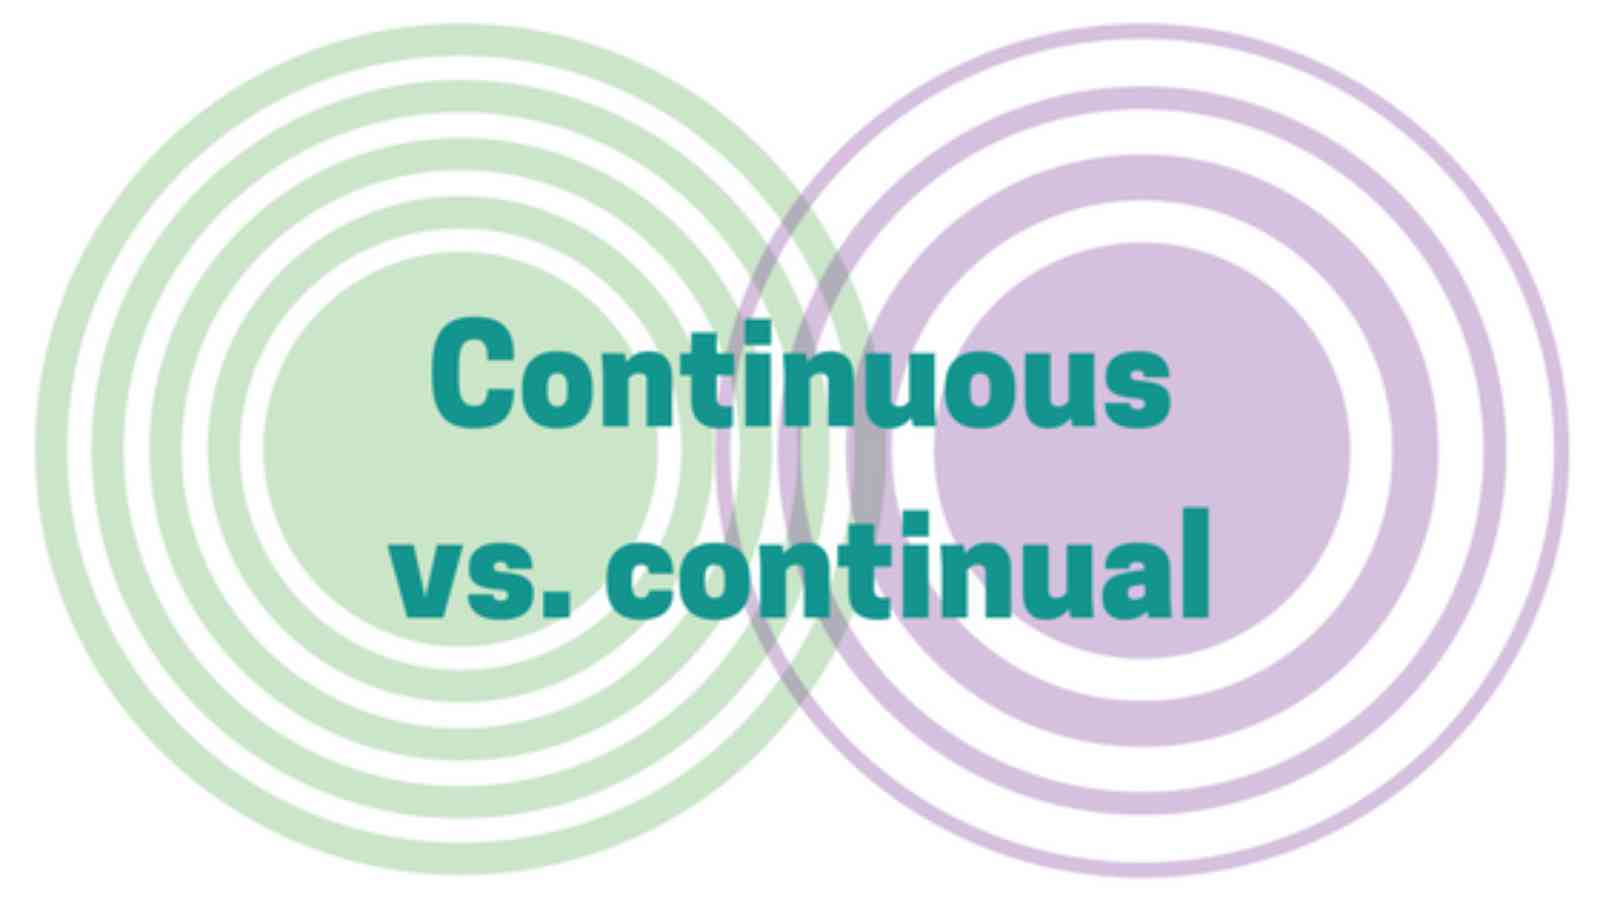 Continual vs Continuous: Difference between Continuous and Continual